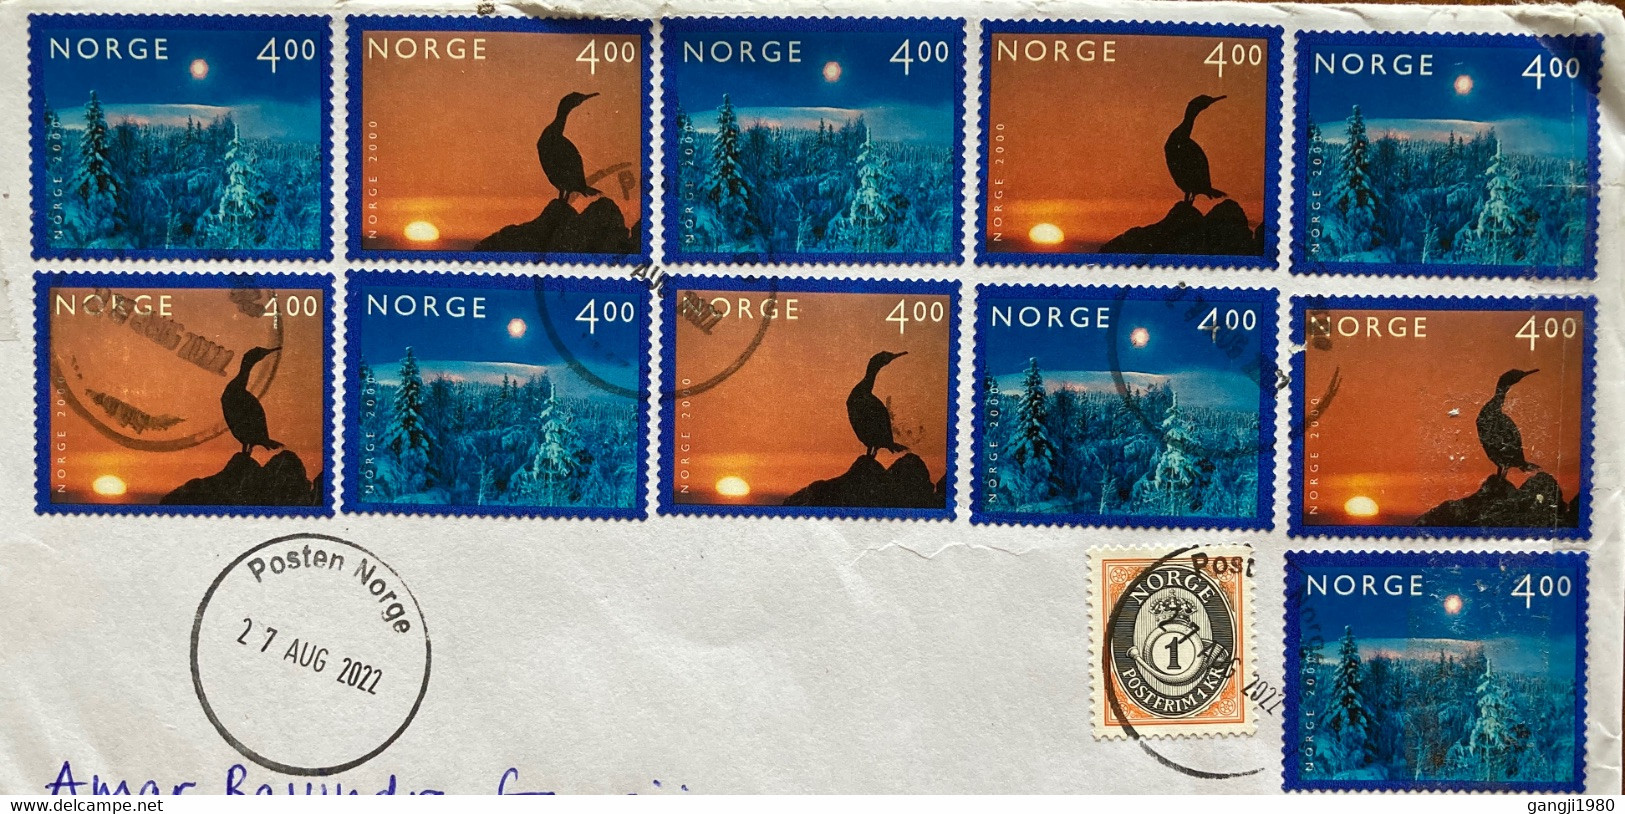 NORWAY,2022,USED COVER 1 SELF ADHESIVE YEAR 2000 MILLENNIUM STAMPS 11 AIRMAIL VIGNETTE,POSTEN NORGE CANCEL TO IN - Covers & Documents